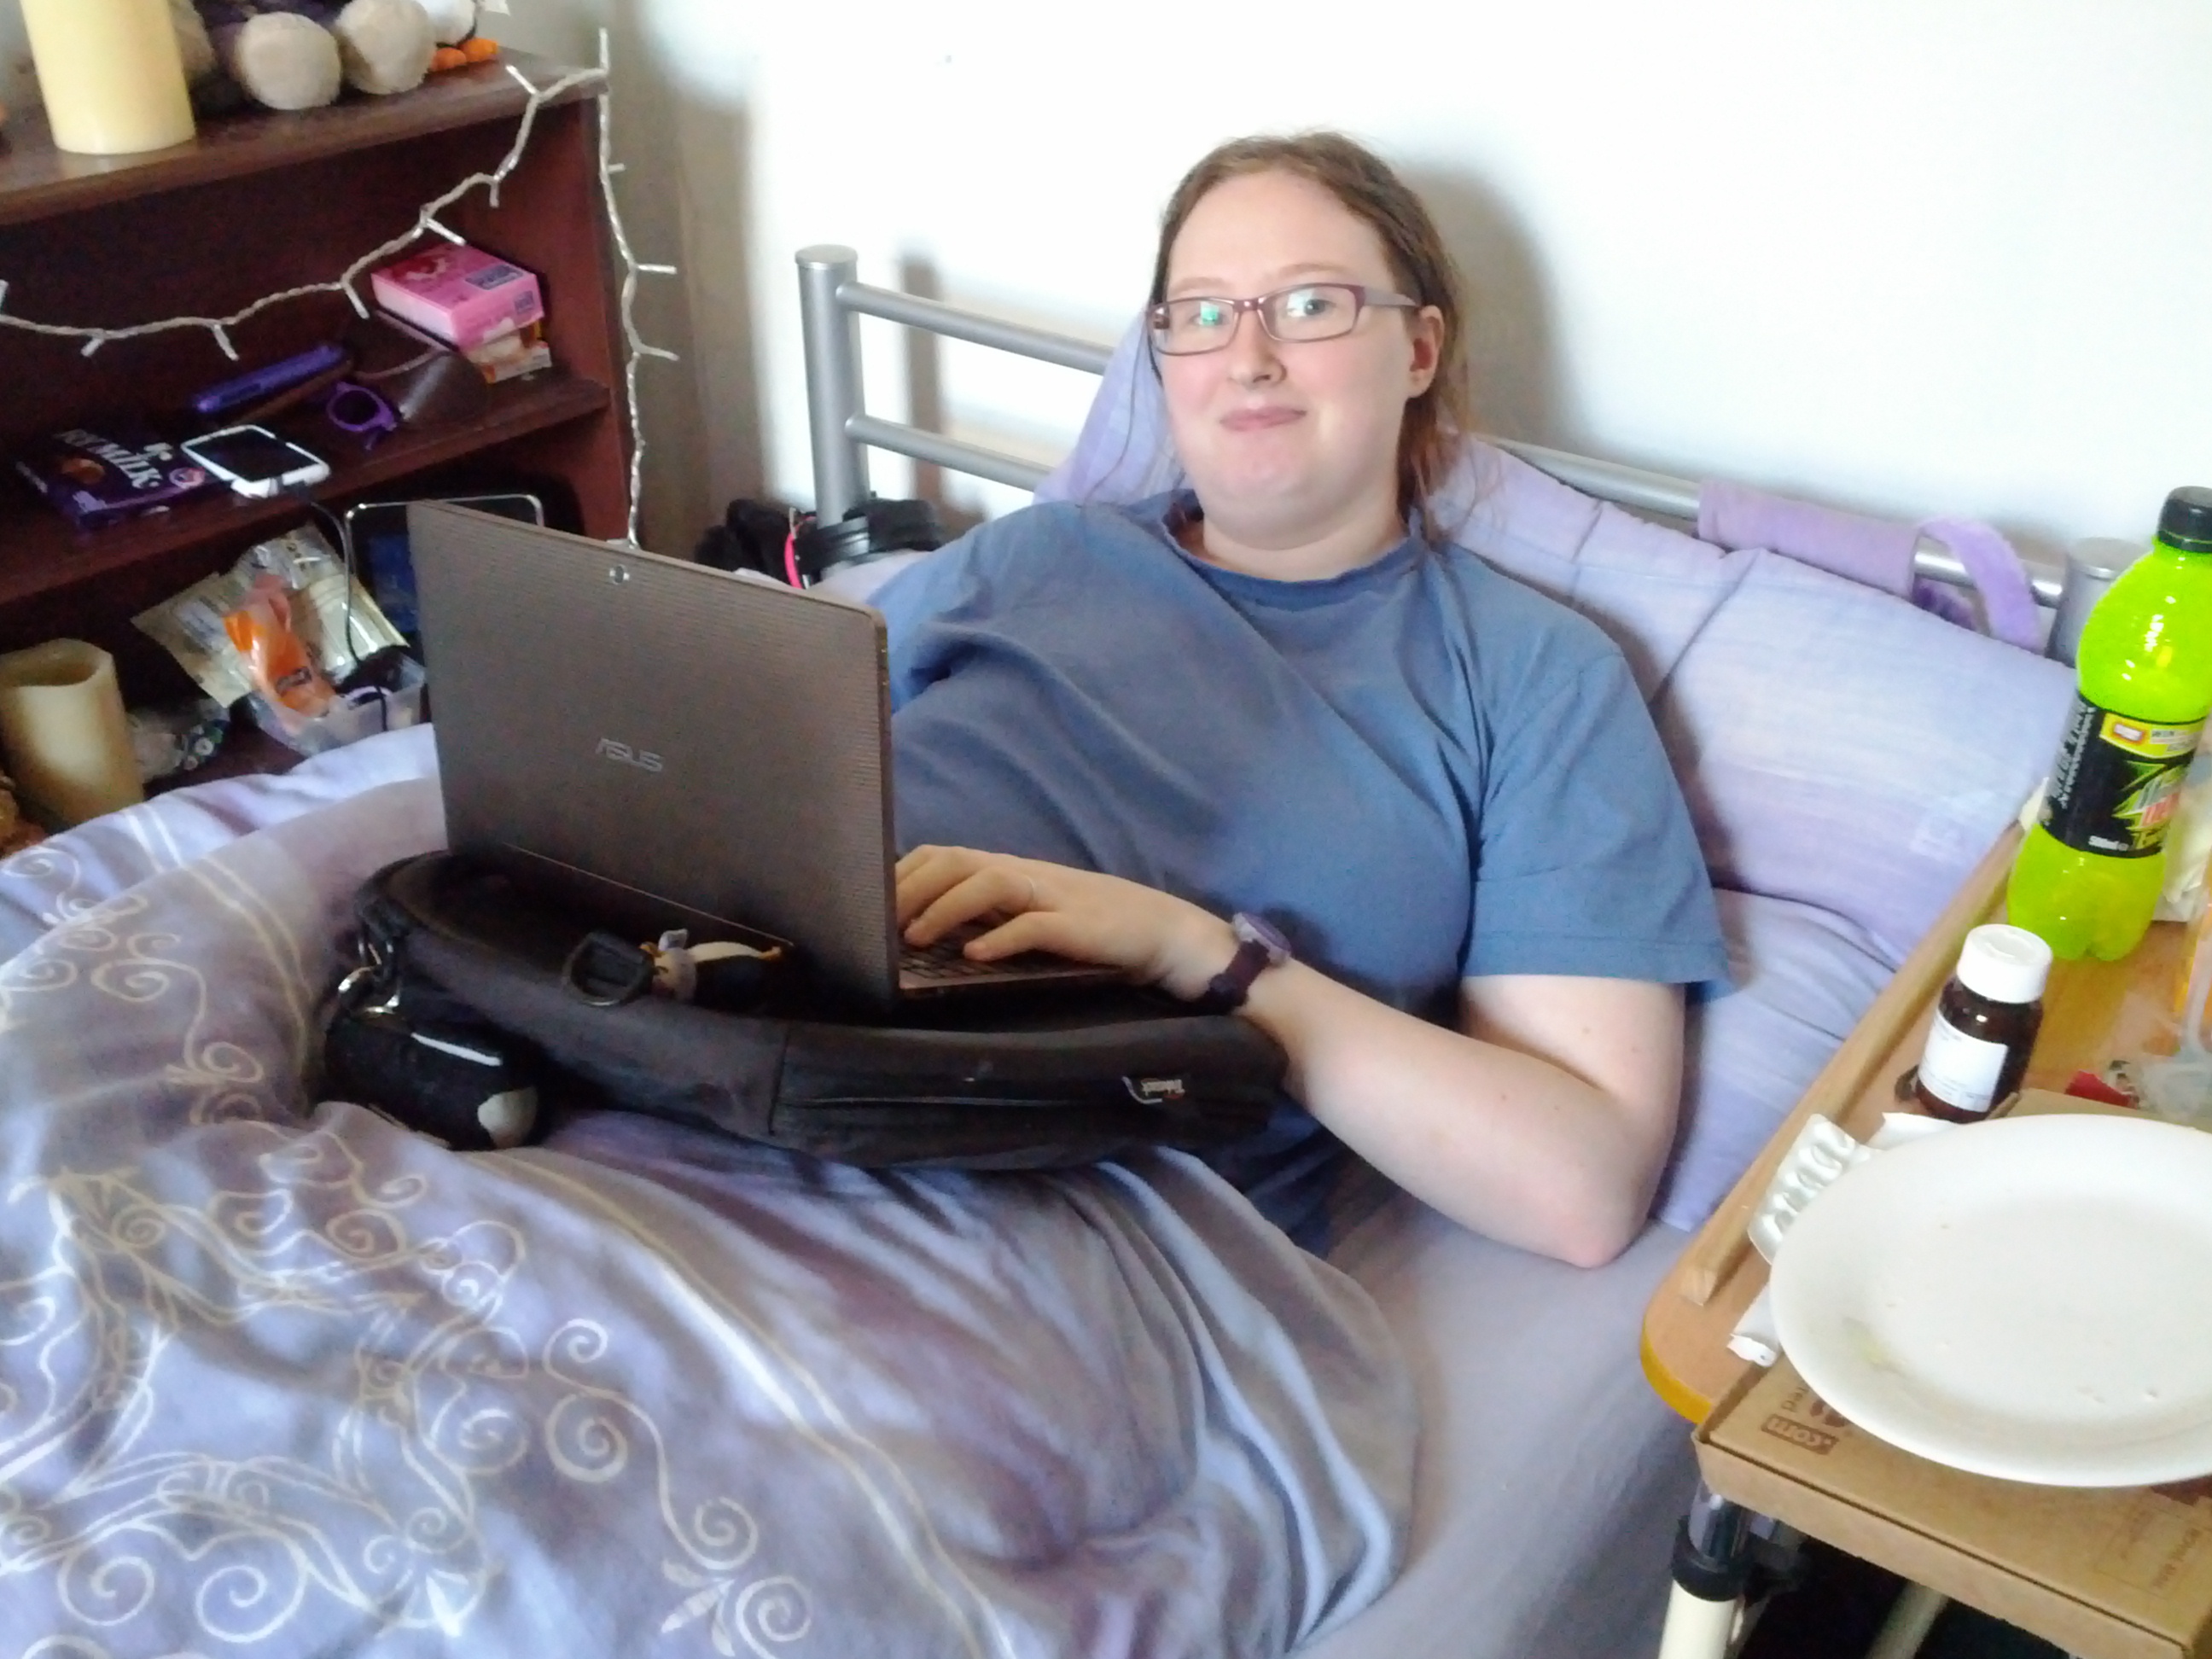 Danni in bed using a laptop on her trabasack